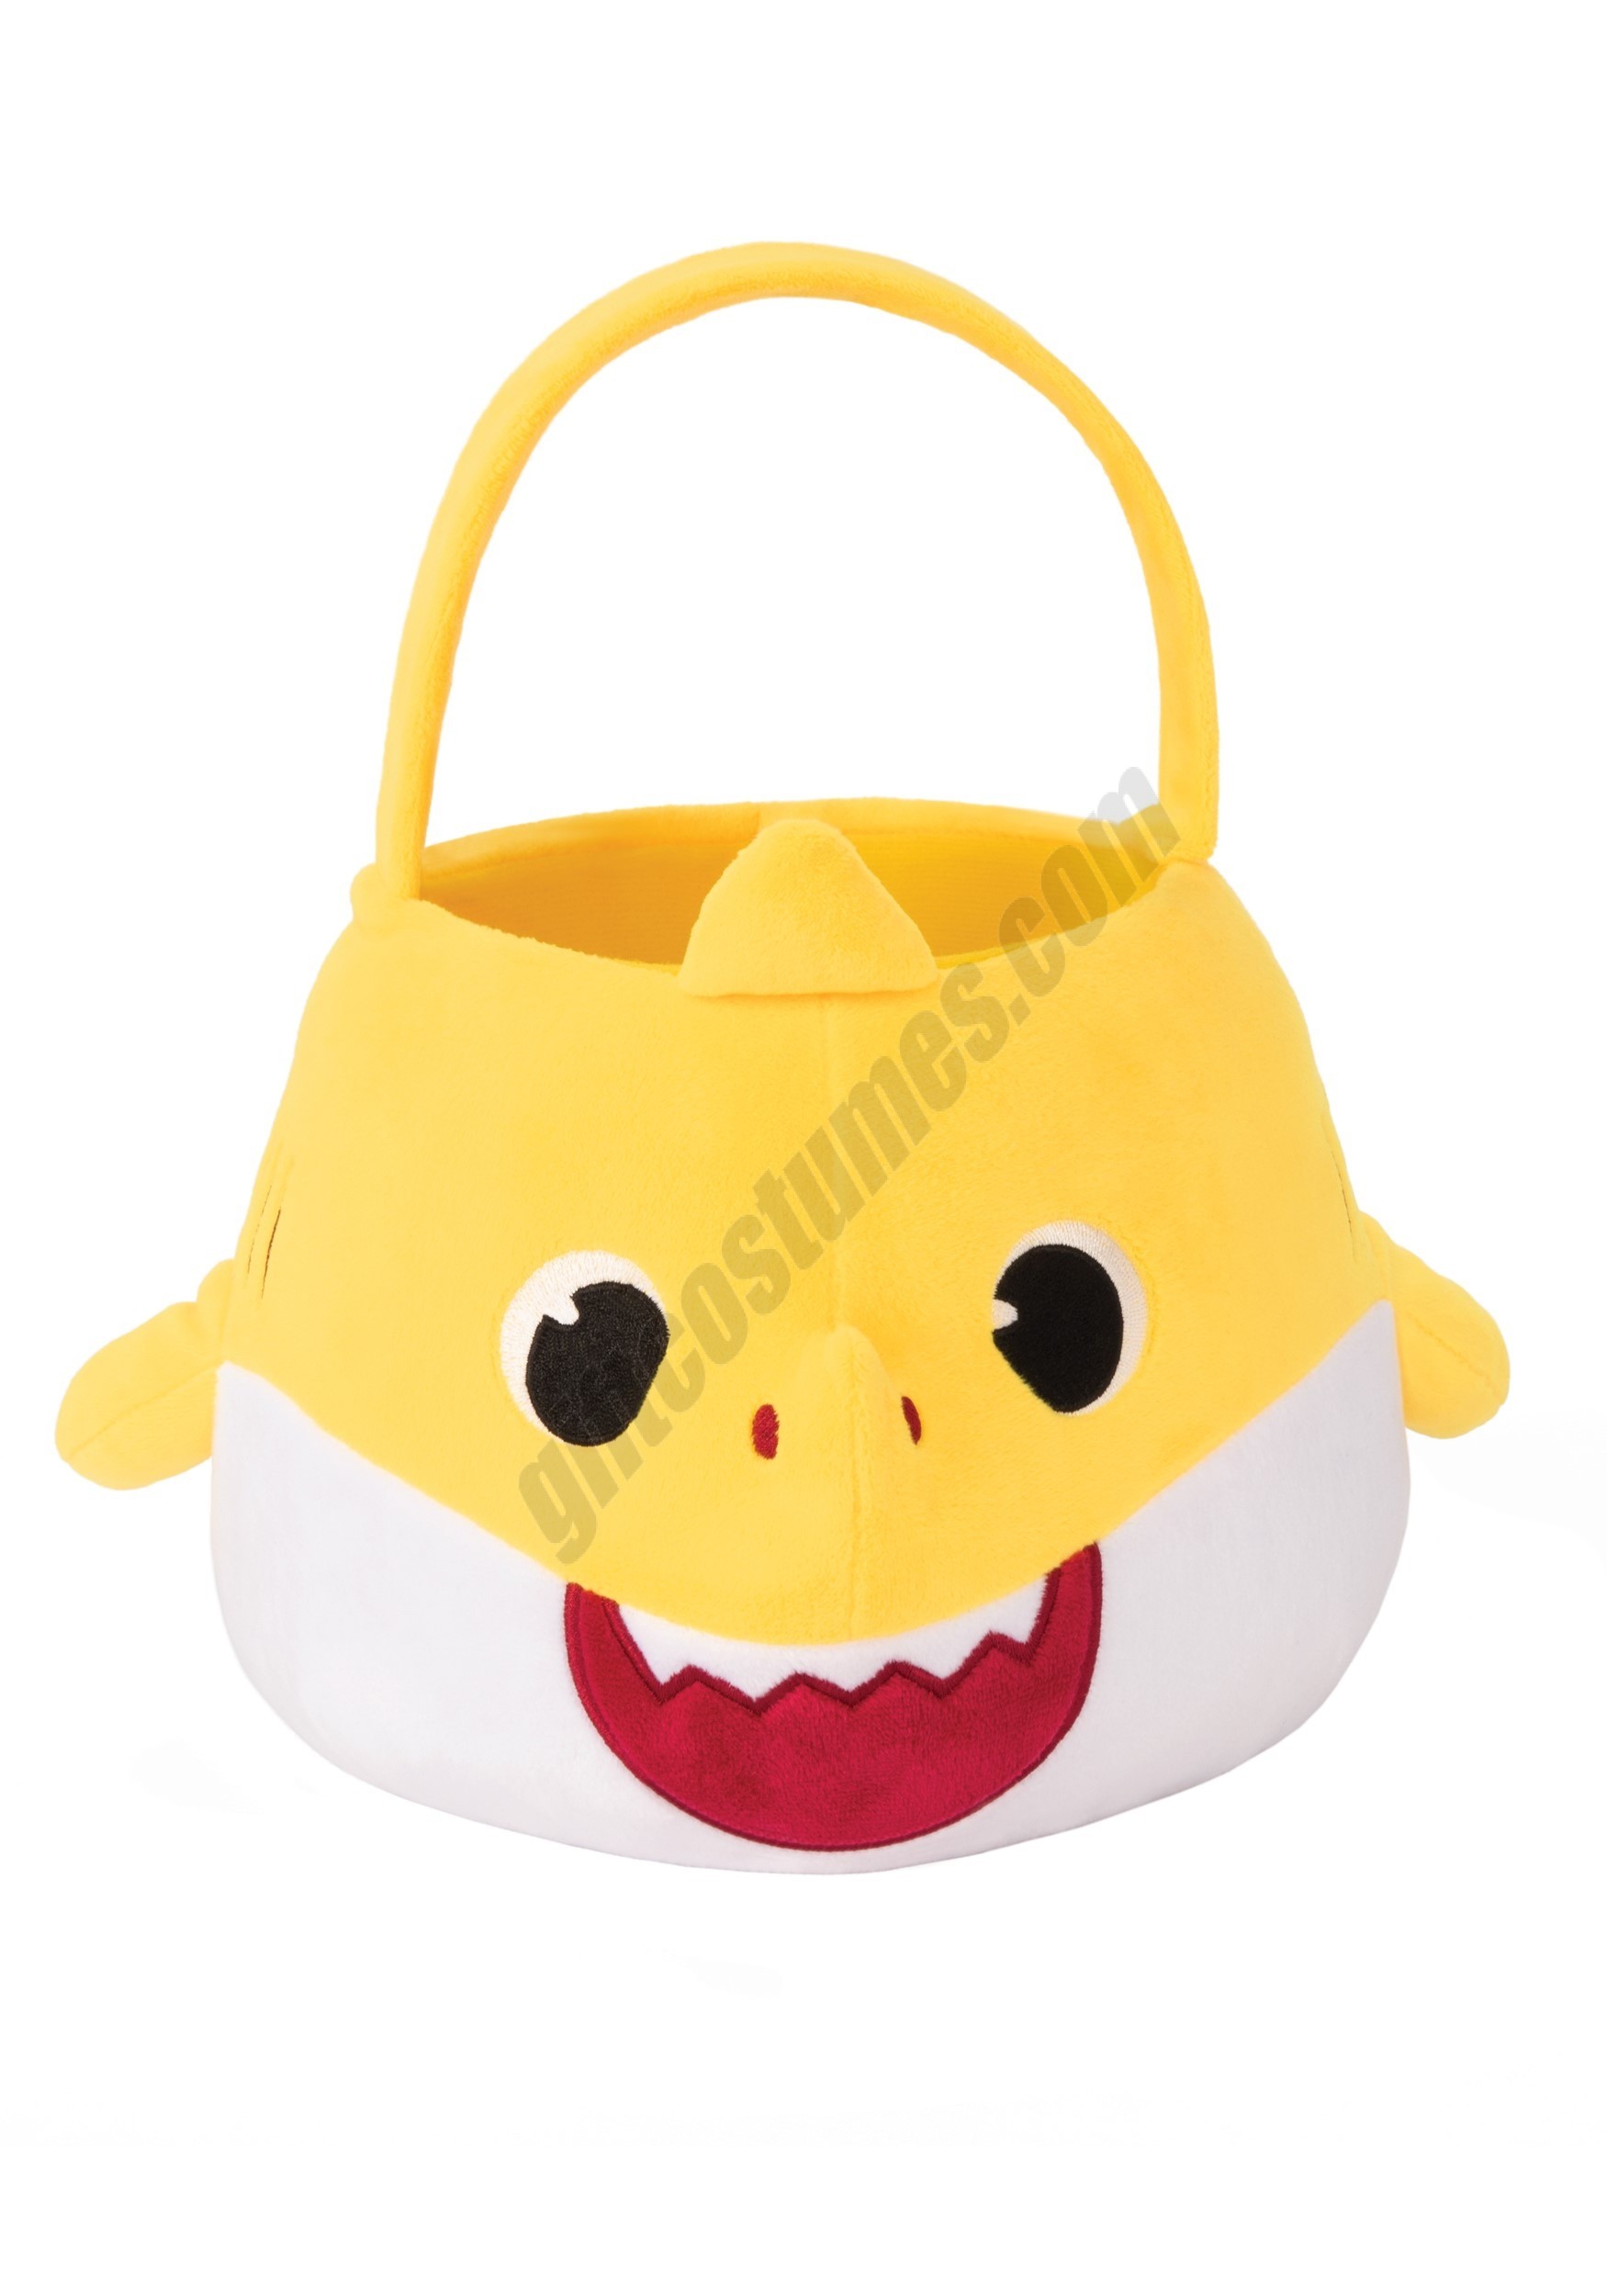 Baby Shark Treat Pail and Soundchip Promotions - Baby Shark Treat Pail and Soundchip Promotions